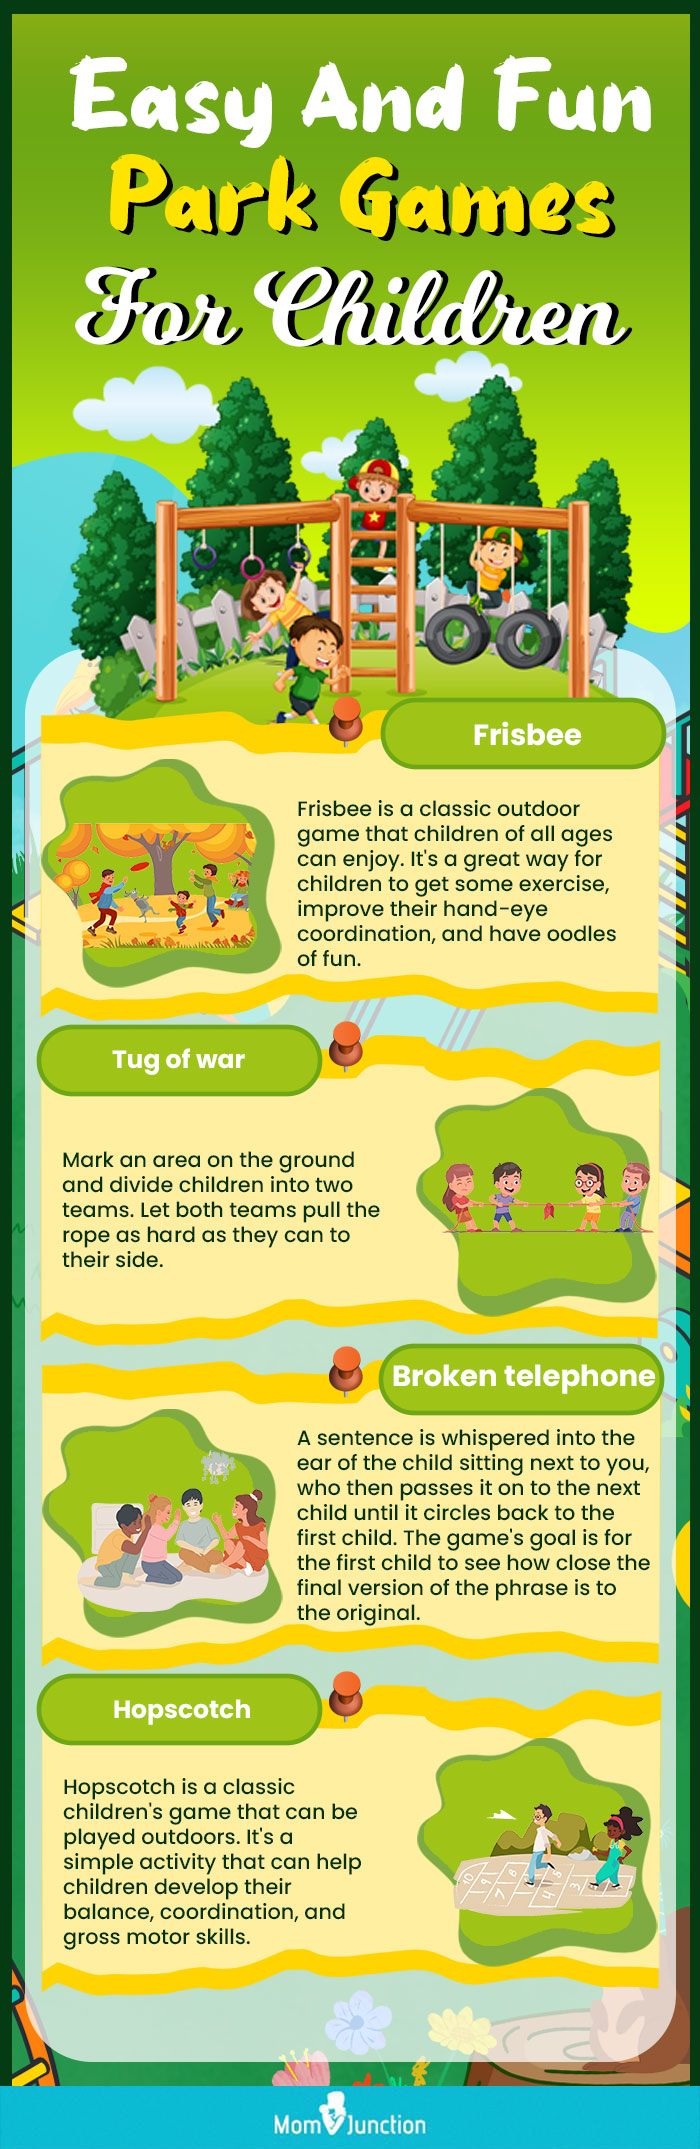 easy and fun park games for children (infographic)